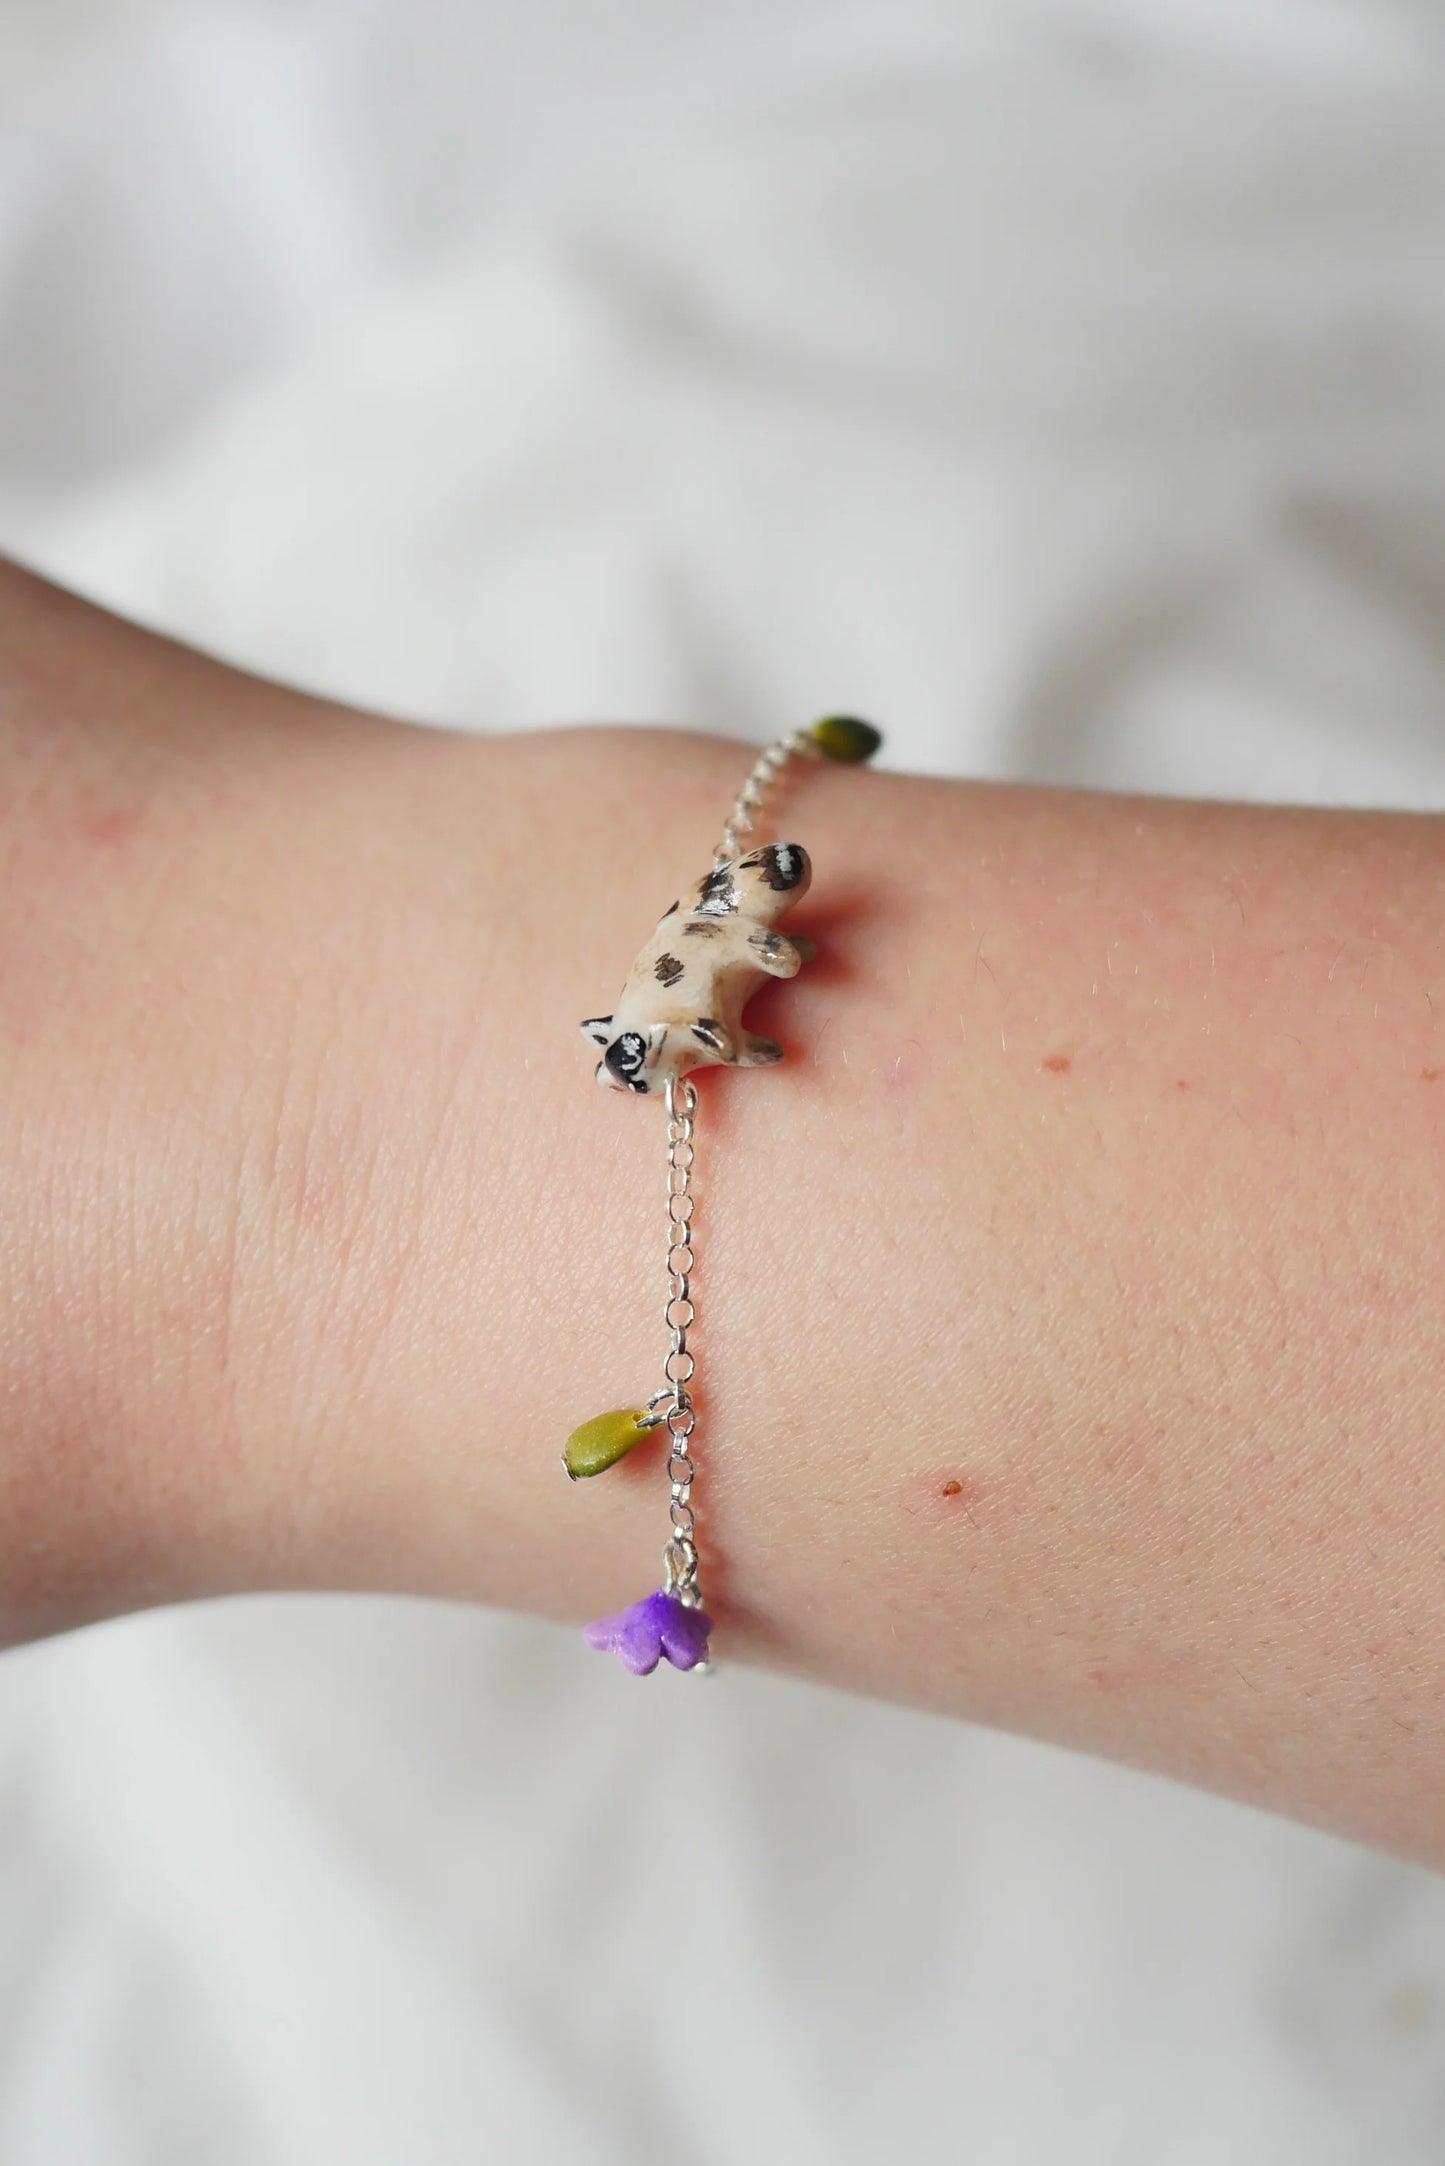 Personalised raccoon bracelet and purple flower charm with clasp